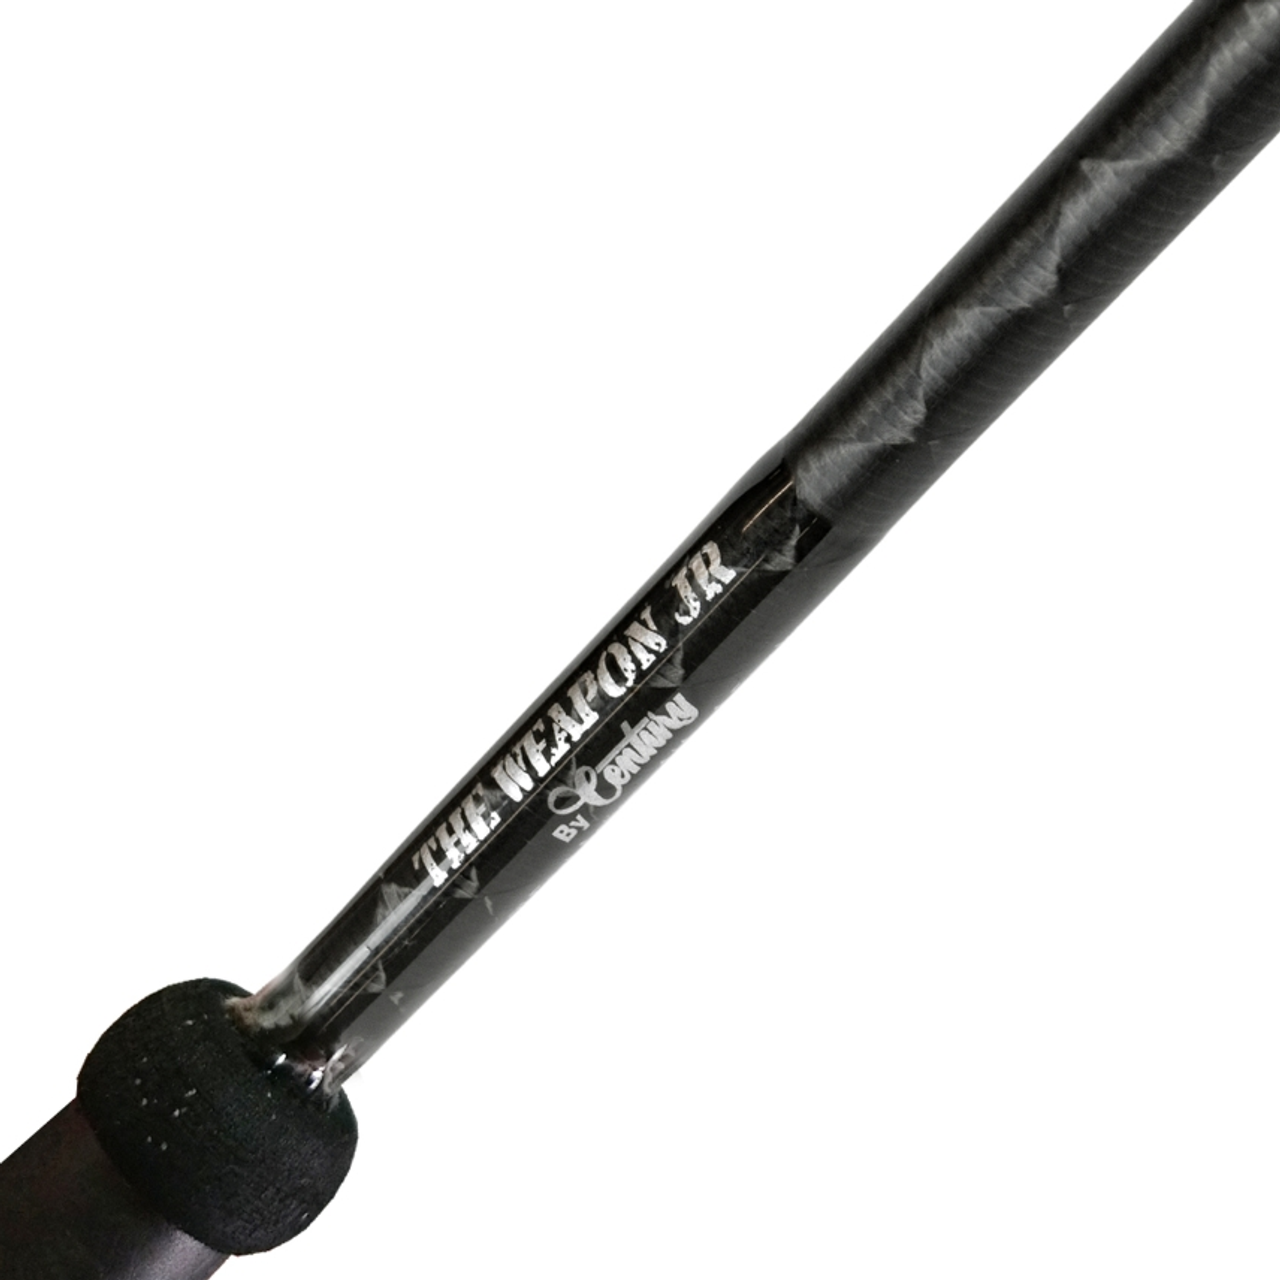 Century SGR (Stealth Graphene Reinforced) Rod with Titanium Guides